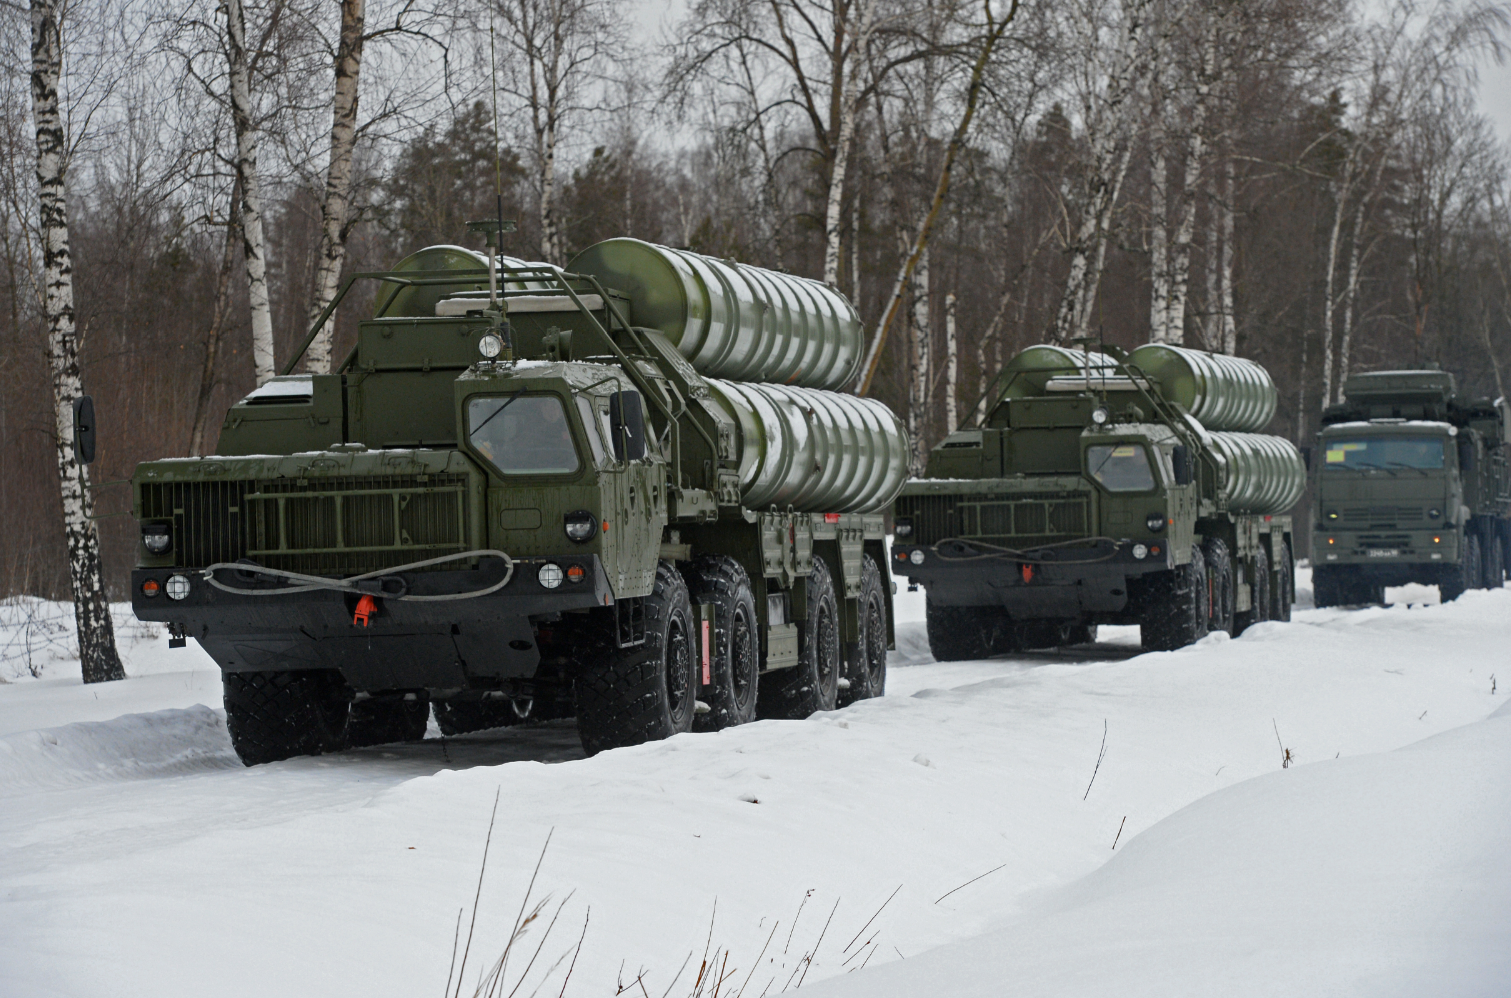 S-400 Triumf is Russia’s long-range anti-aircraft missile system that went into service in 2007. Source: Mikhail Voskresenskiy/RIA Novosti